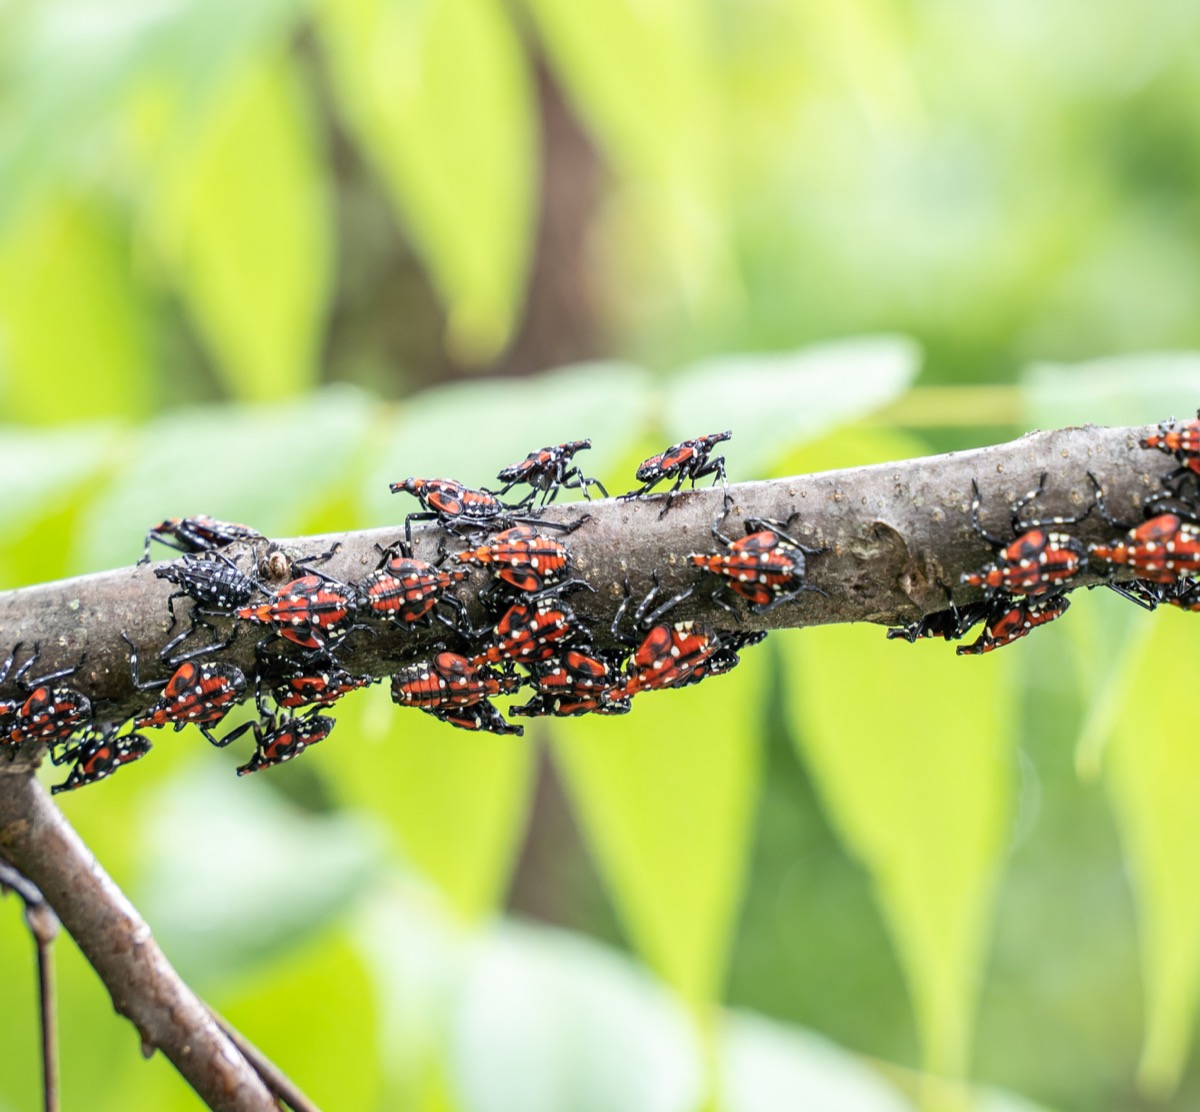 Spotted,Lanternfly,Nymphs,On,Sumac,Tree,In,Berks,County,,Pennsylvania